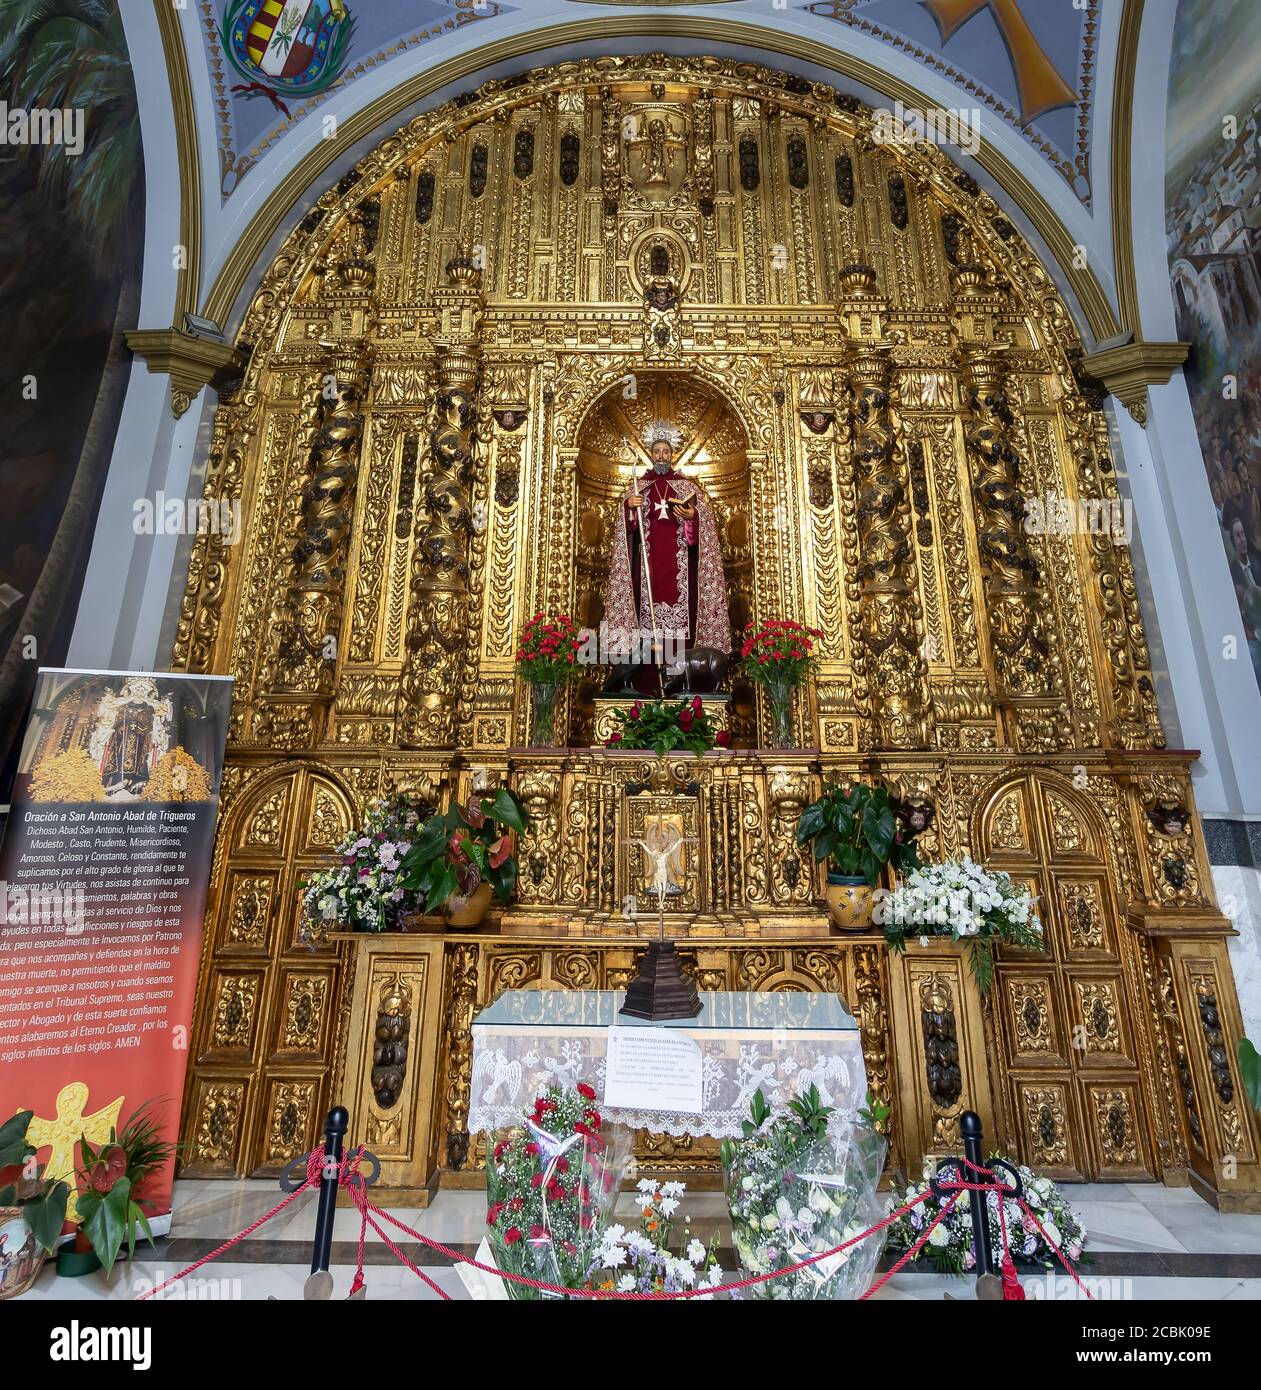 Trigueros, Huelva, Spain - August 13, 2020: Chapel of St Anthony Abbot or Antony the Great (San Antonio Abad) in Trigueros a town in the province of H Stock Photo